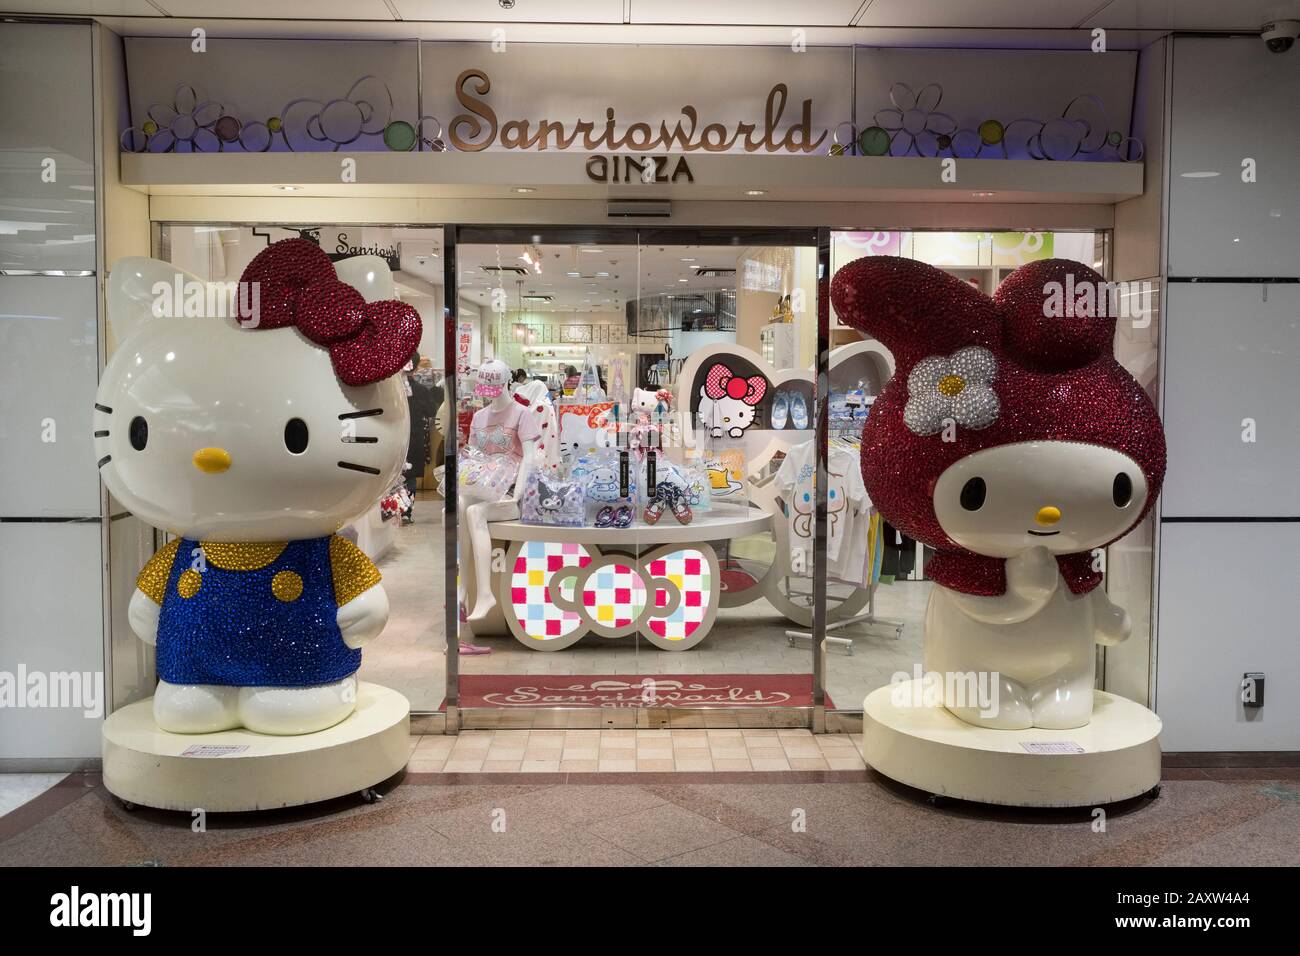 Japan Tokyo Window Of The Sanrioworld Store In Ginza District With The Character Hello Kitty Stock Photo Alamy